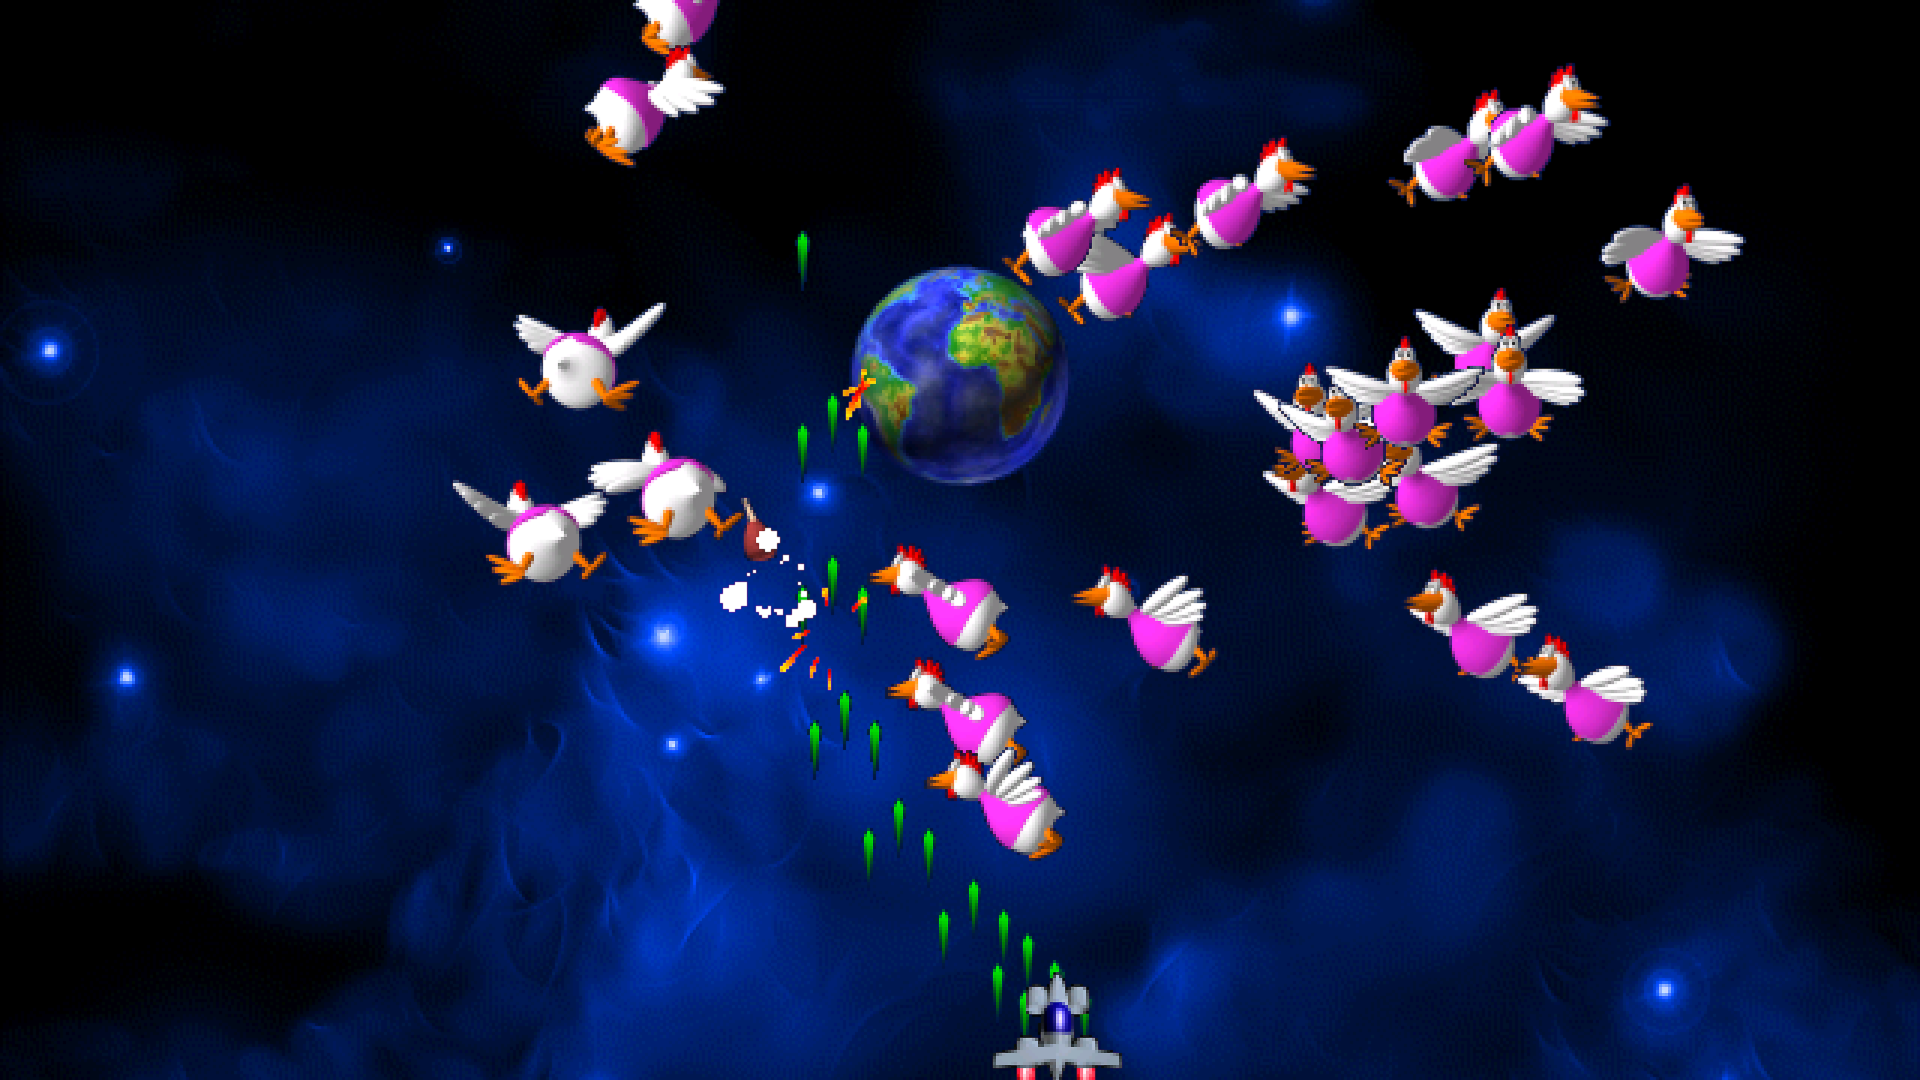 Timeless mini-games. Today: Chicken Invaders